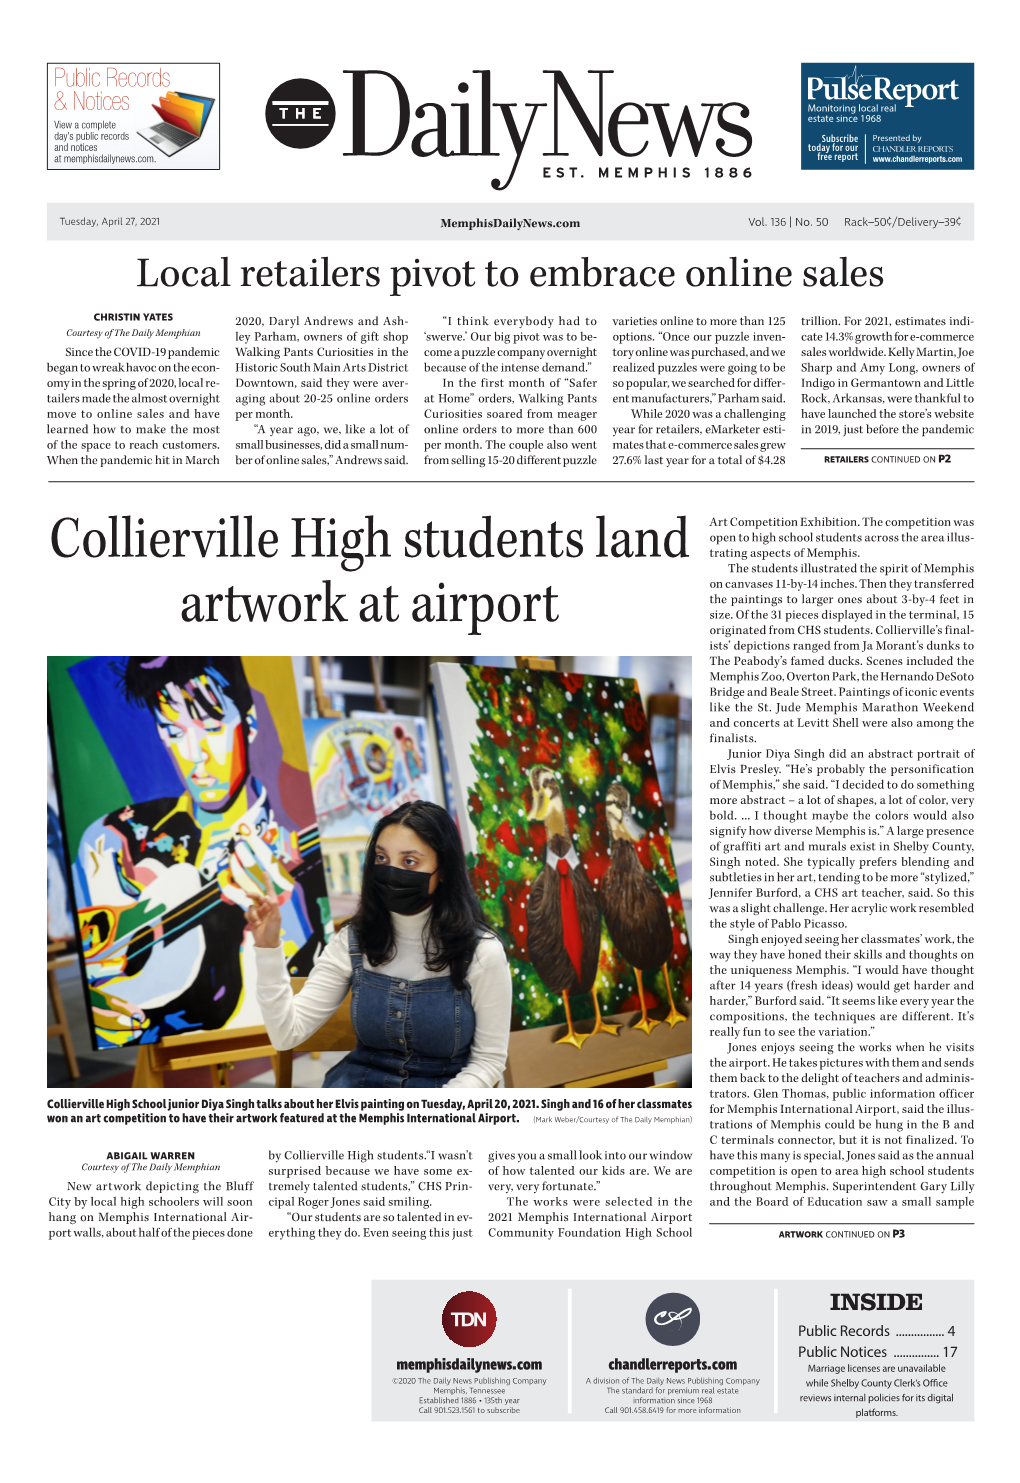 Collierville High Students Land Artwork at Airport